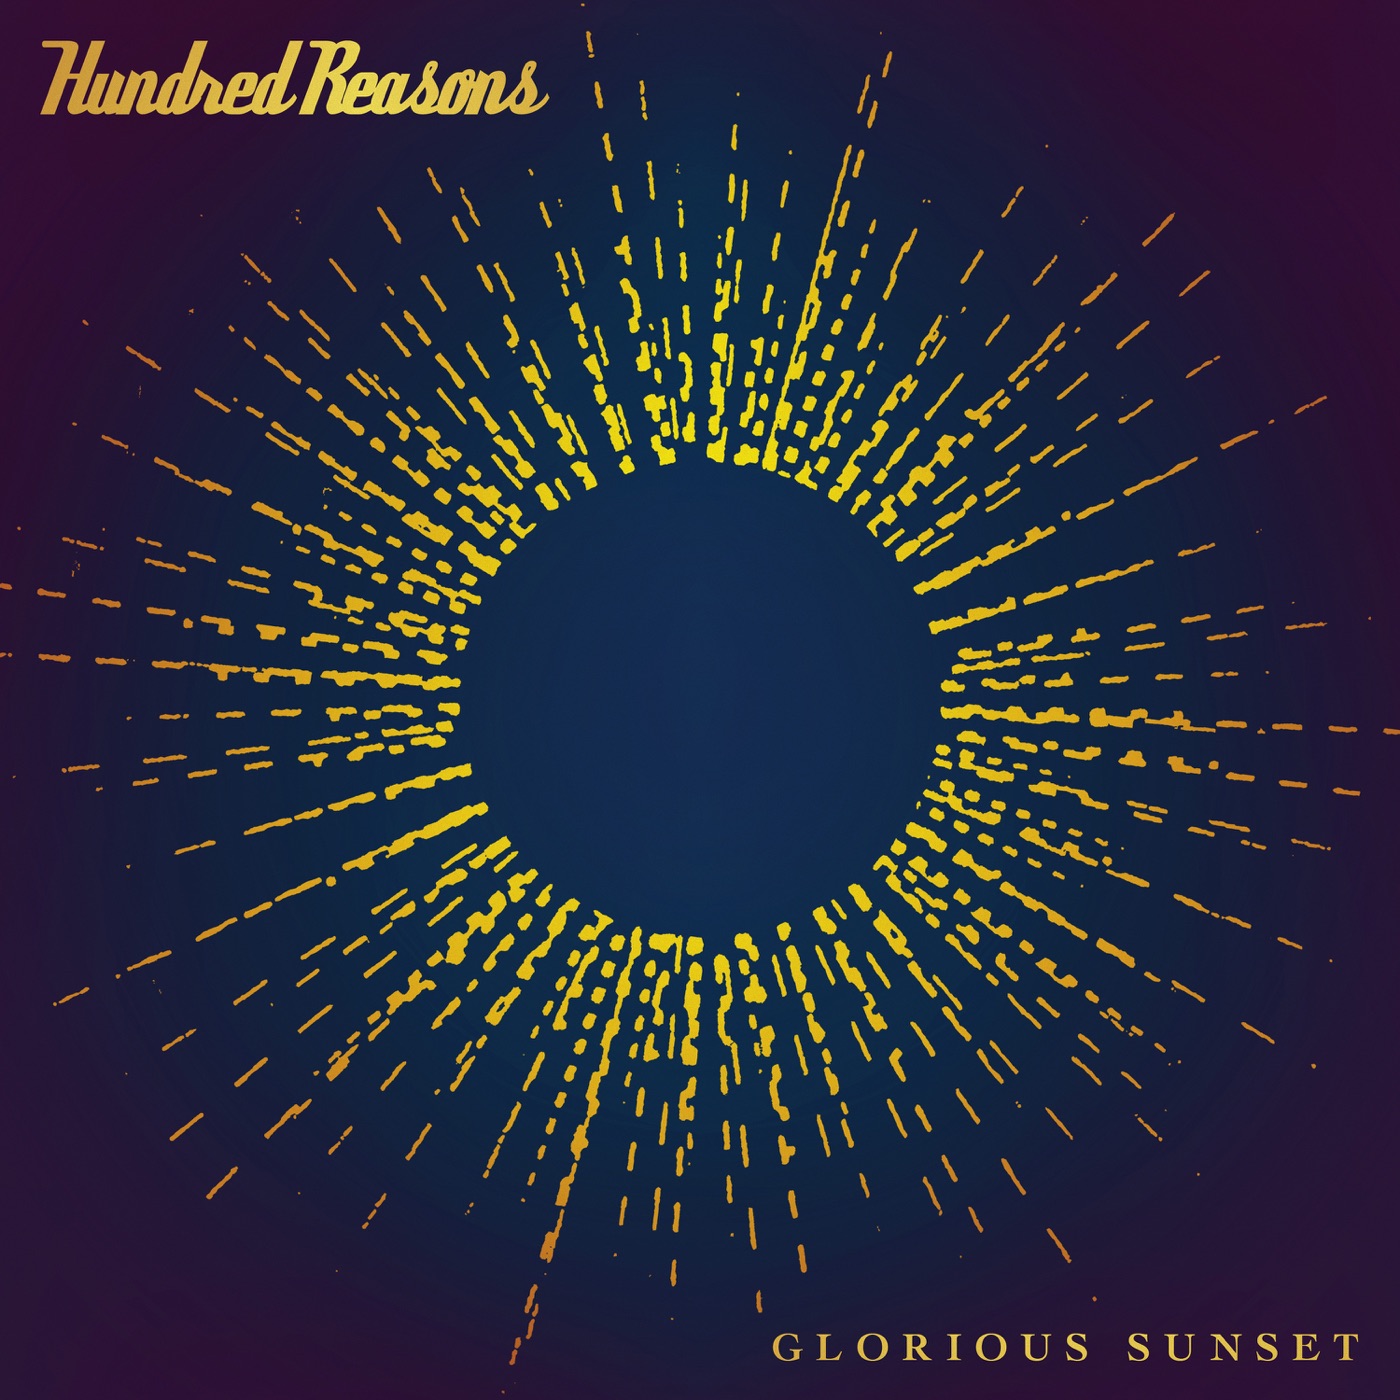 Glorious Sunset by Hundred Reasons, Glorious Sunset